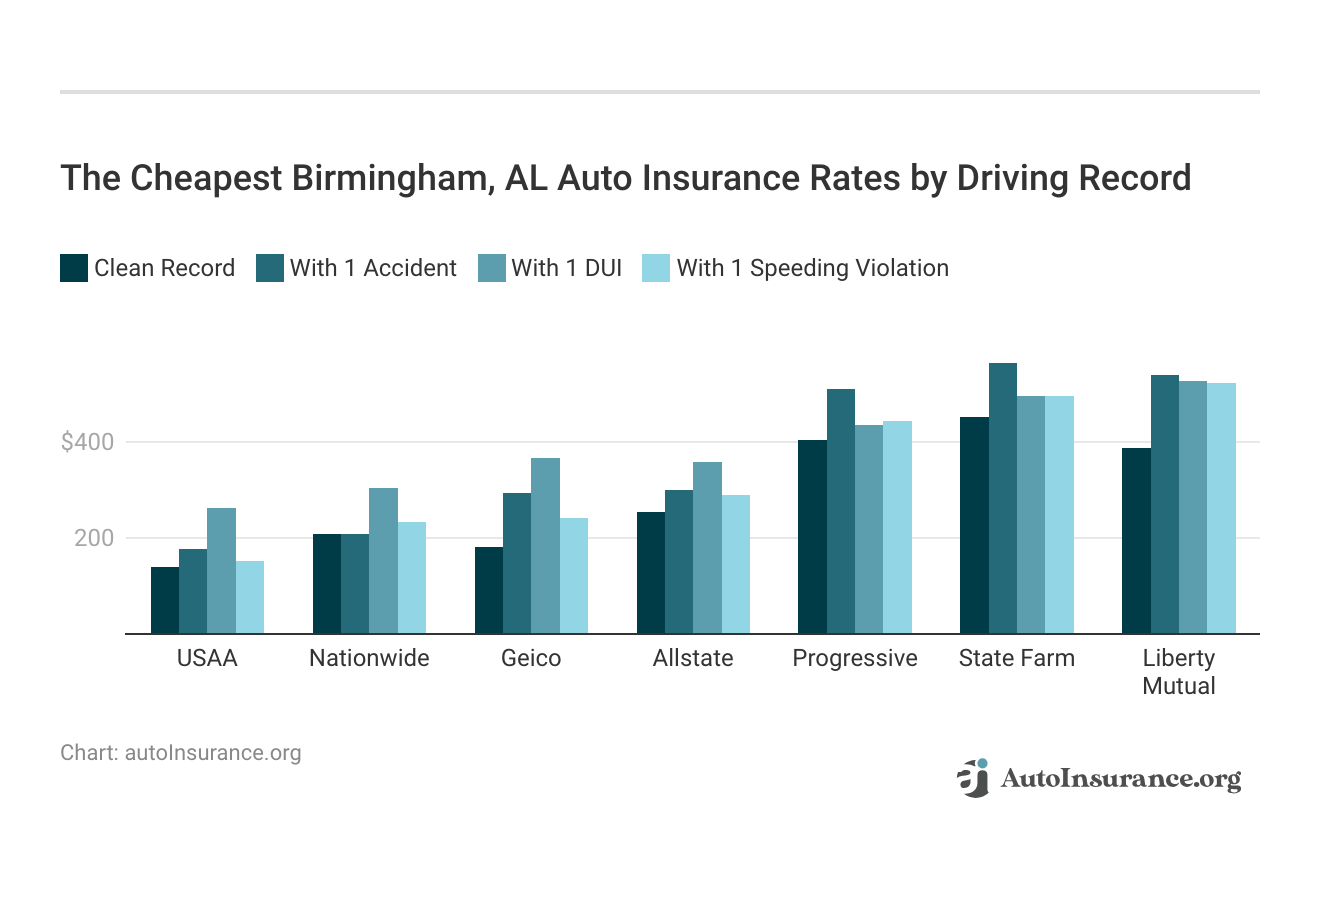 <h3>The Cheapest Birmingham, AL Auto Insurance Rates by Driving Record</h3>